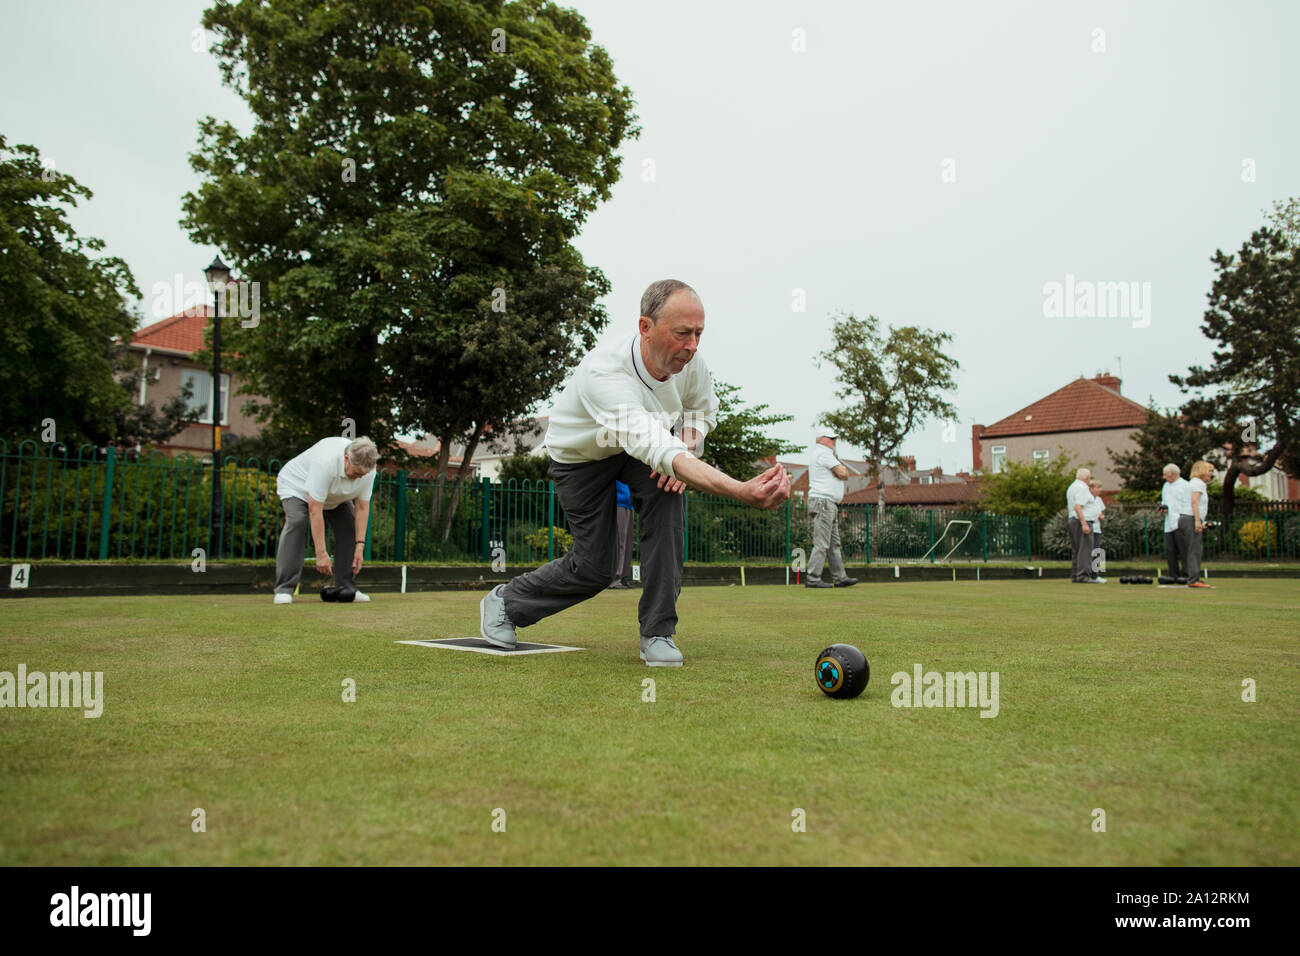 A front view shot of a senior man taking his shot in a game of lawn bowling. Stock Photo